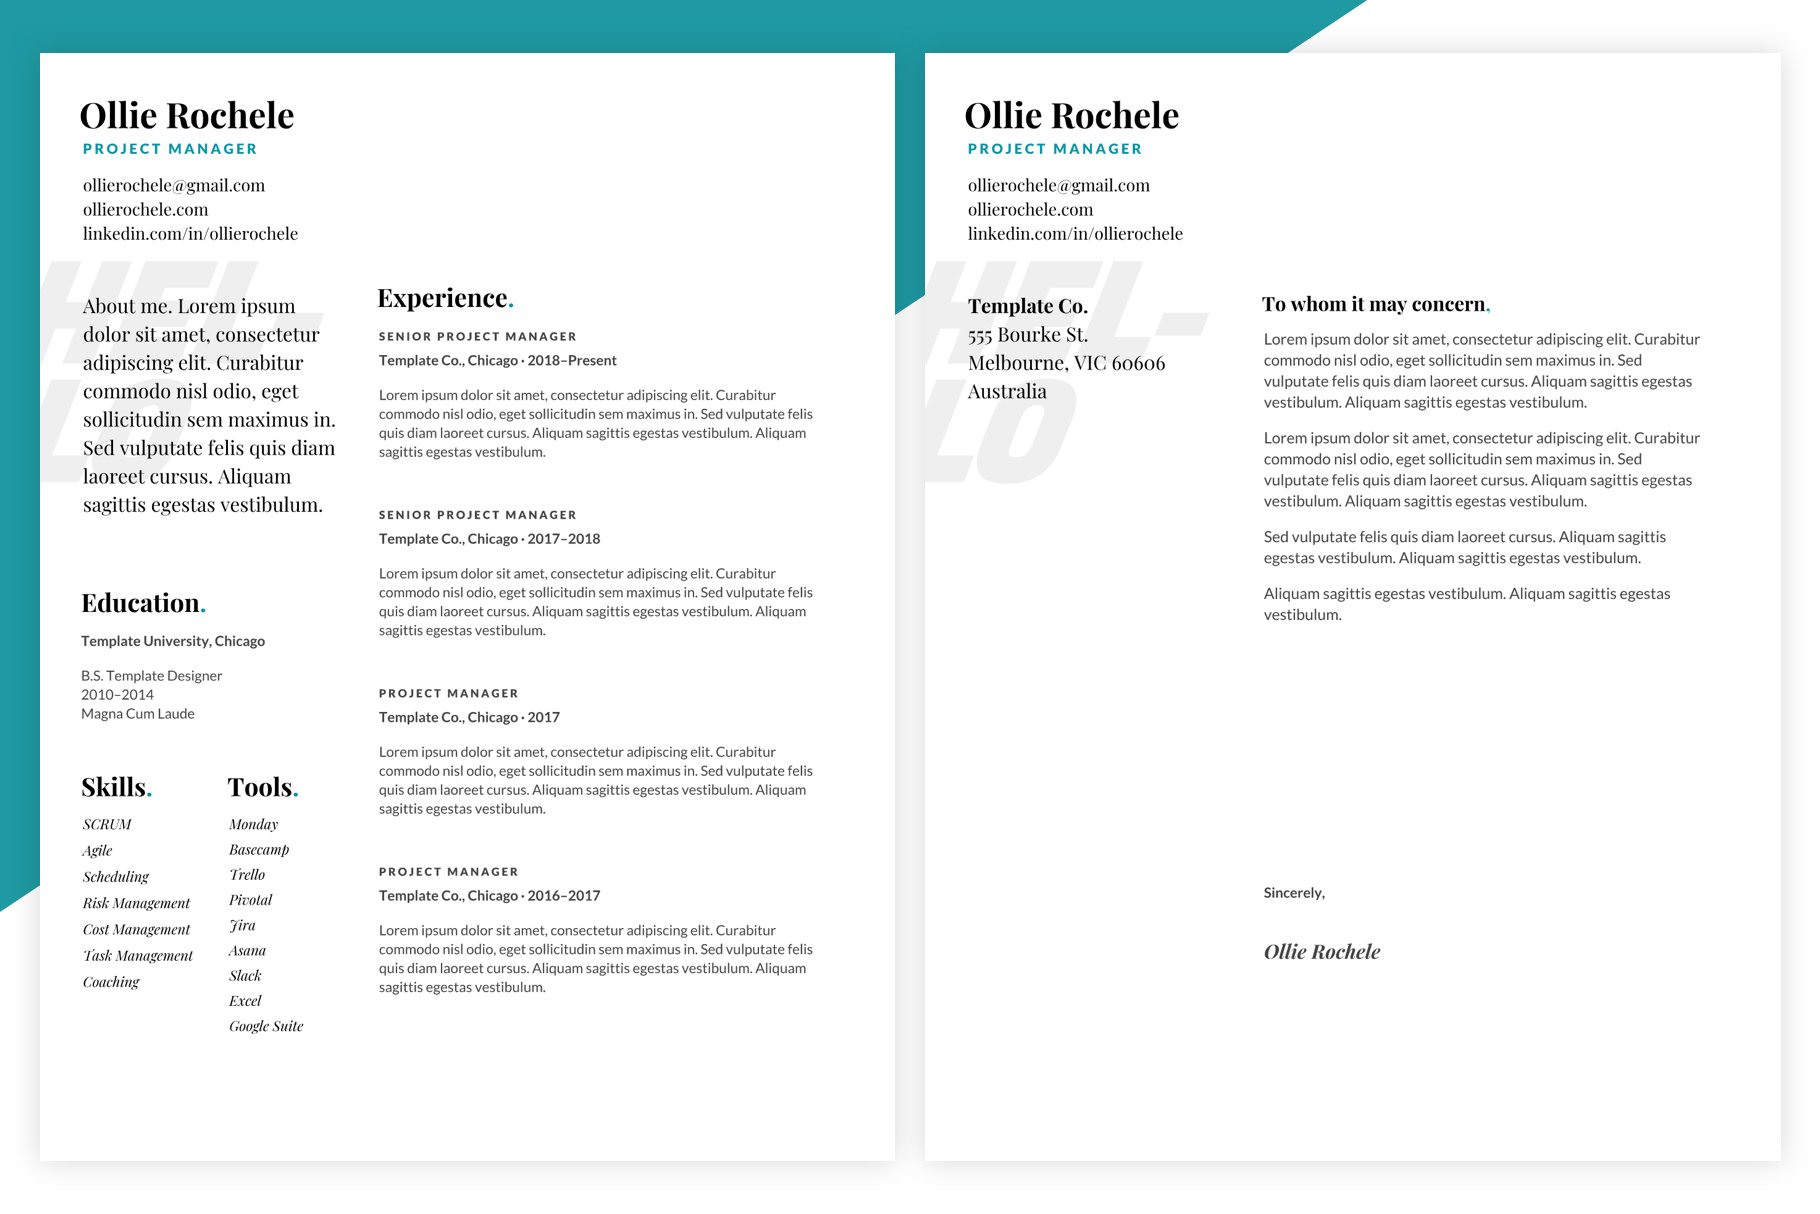 Ollie - Resume and Cover Letter preview image.